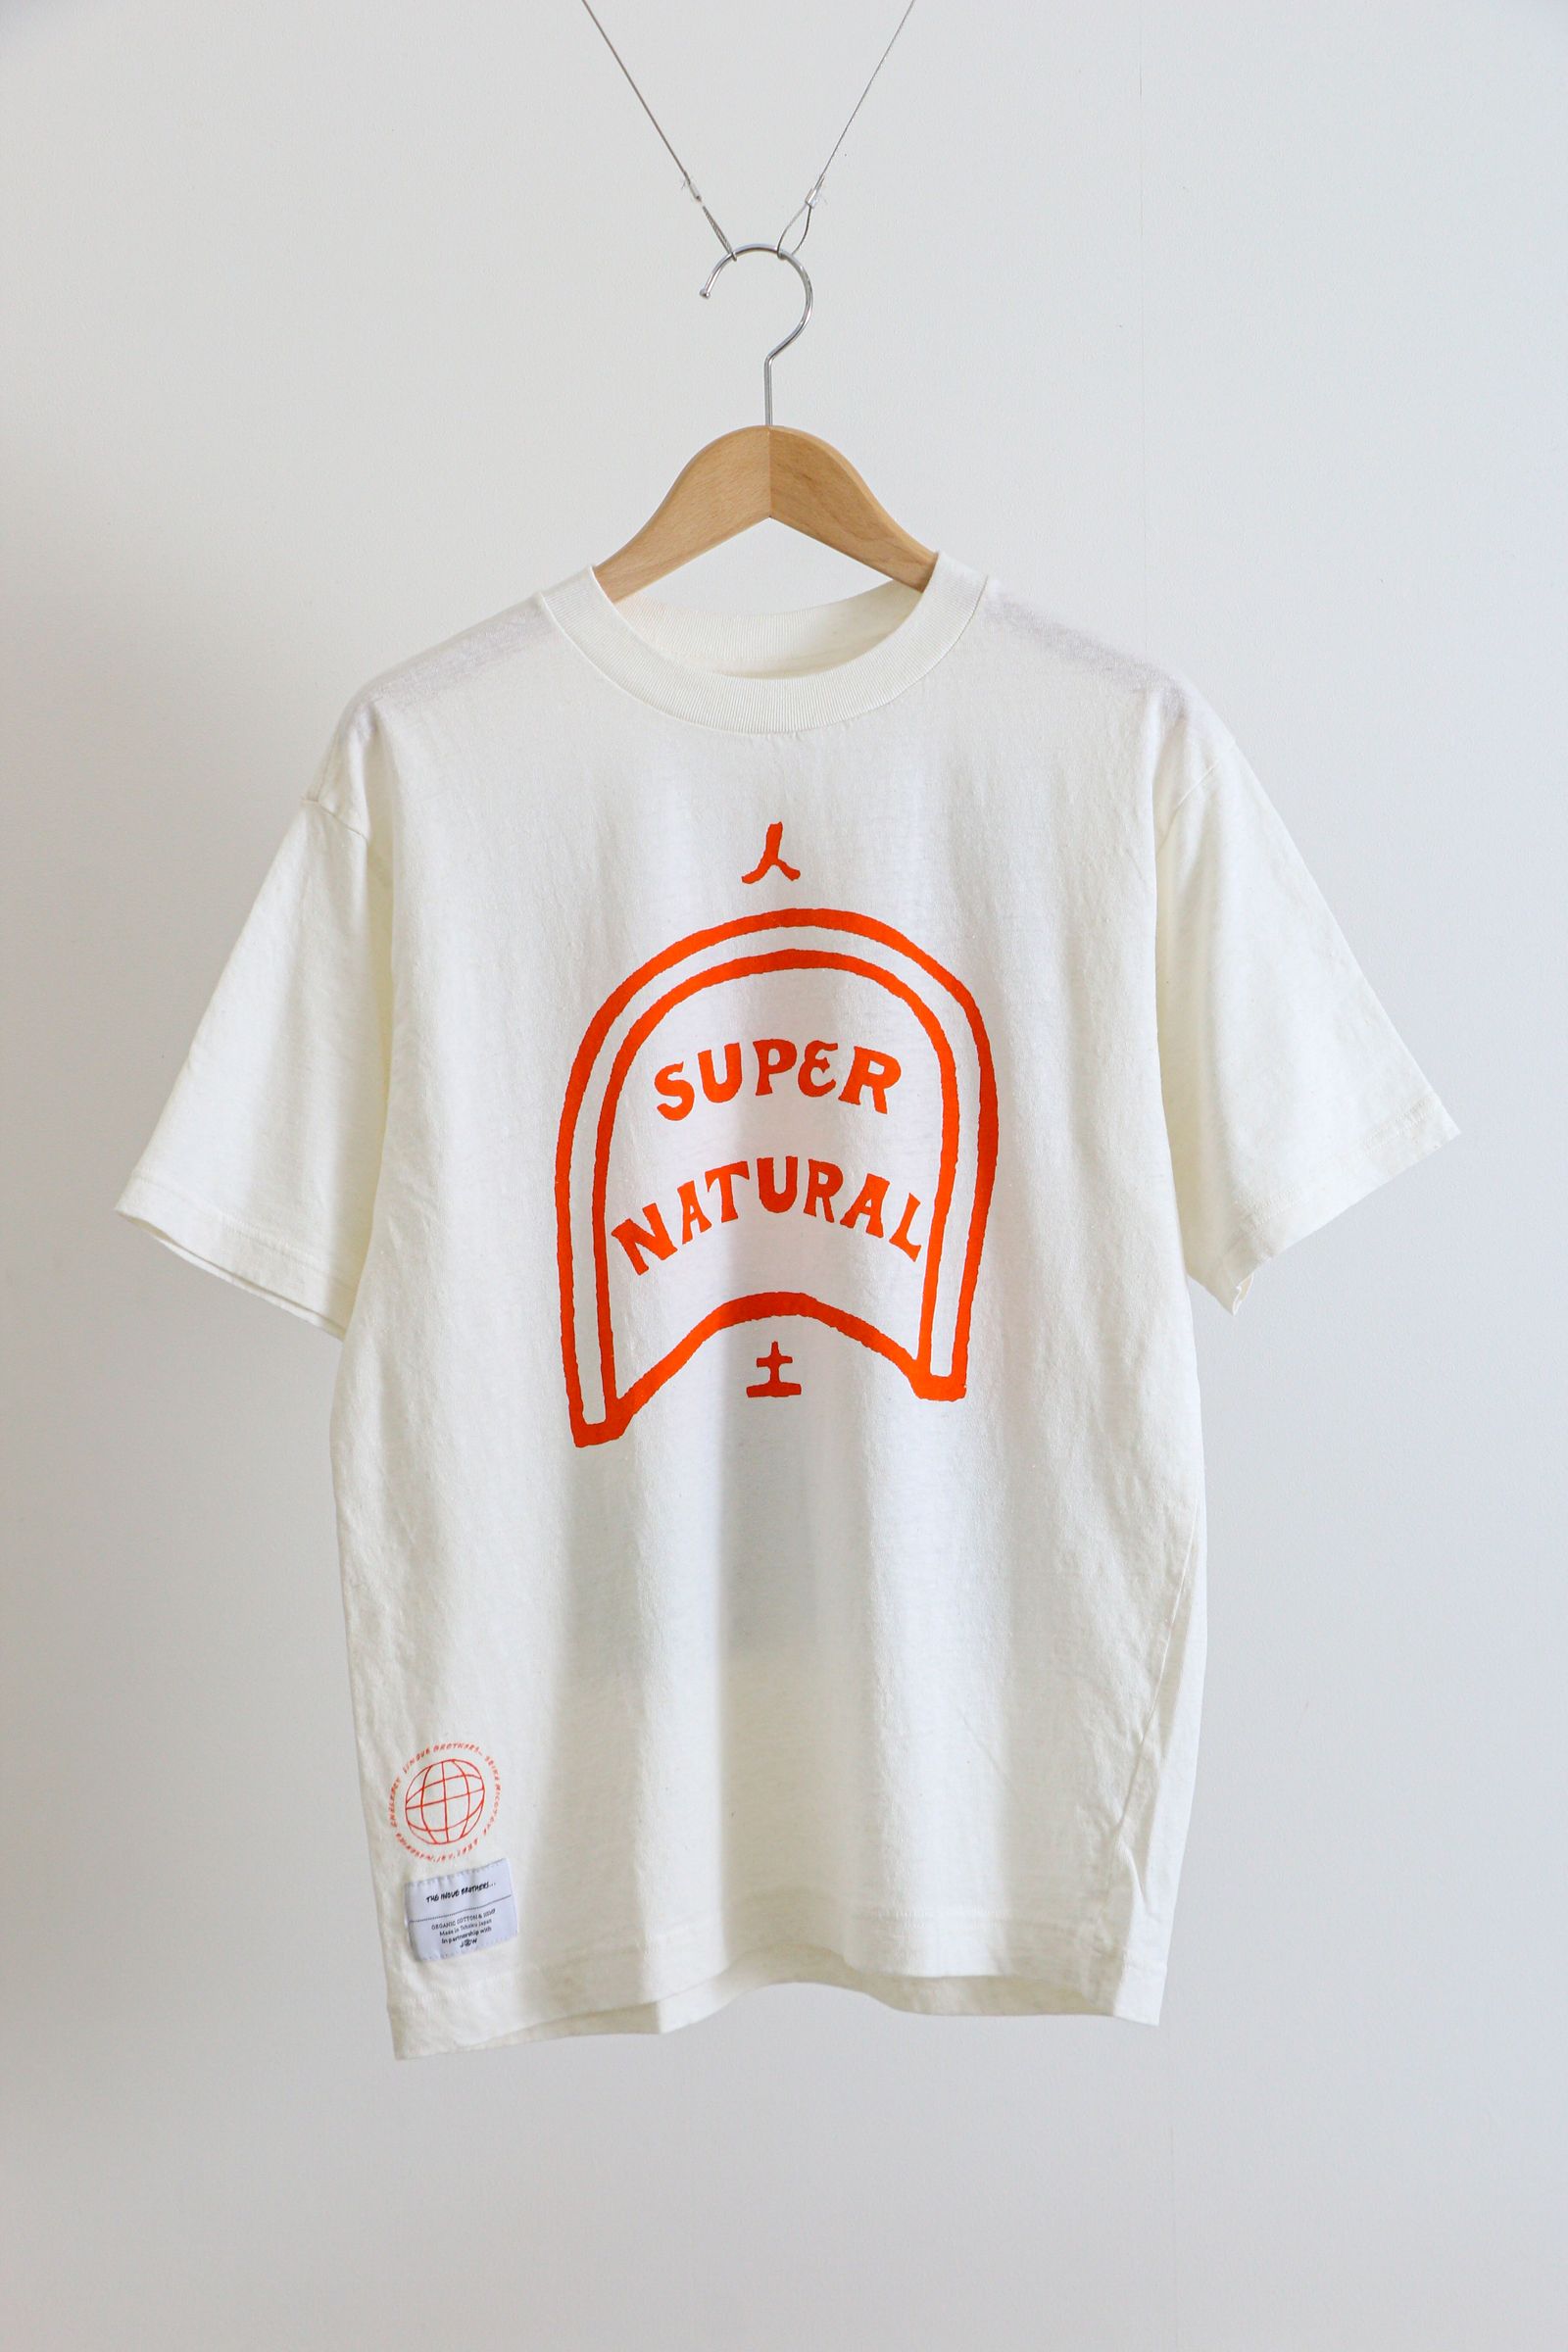 THE INOUE BROTHERS - Natural Micotoya White / Tシャツ / 綿麻混紡